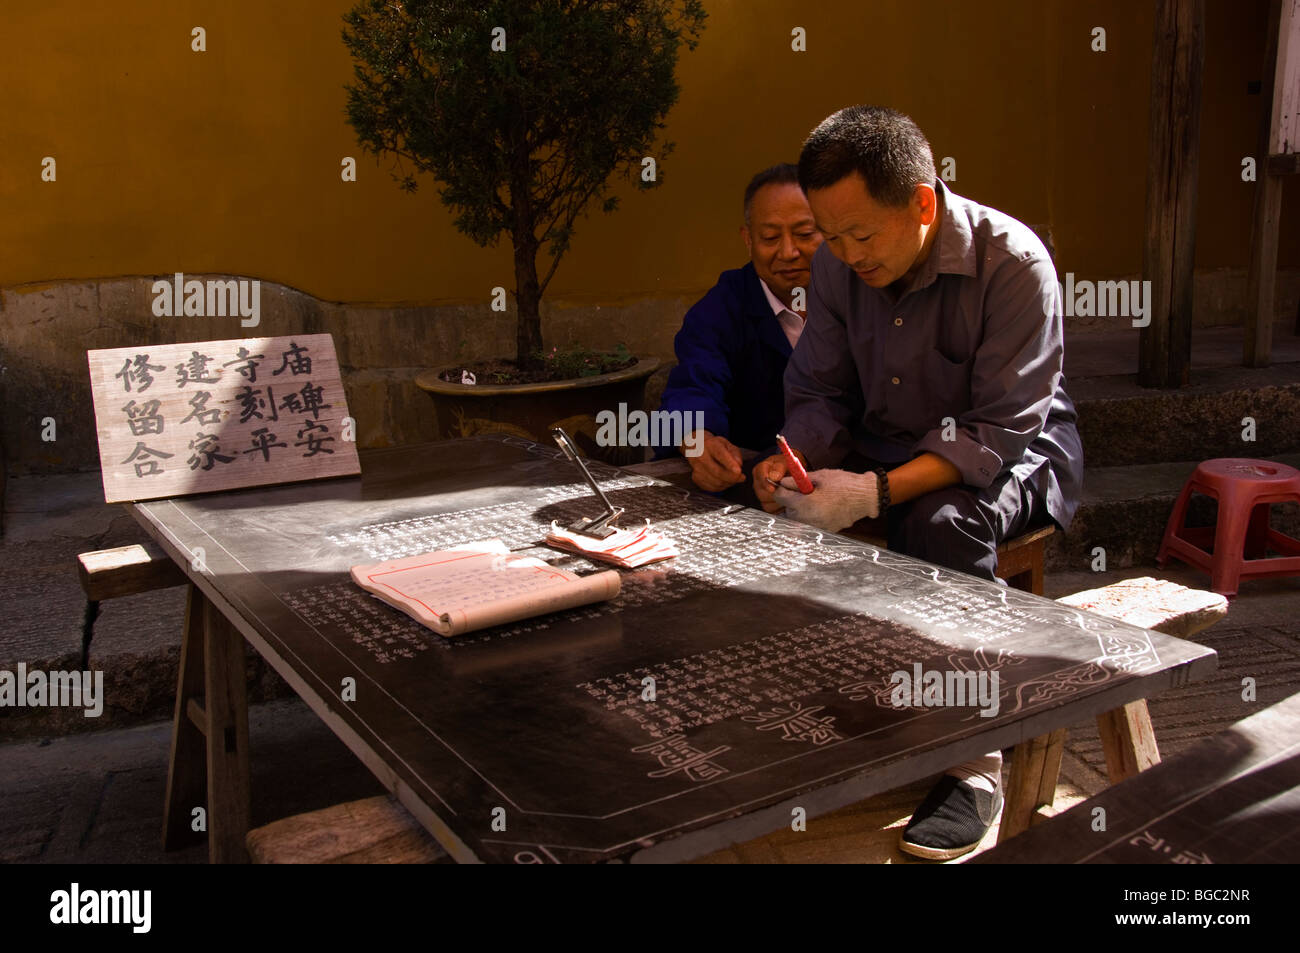 Man engraving the names of contributors of the Zhiyuan temple on a stone tablet. Jiuhua Shan. Anhui province, China. Stock Photo